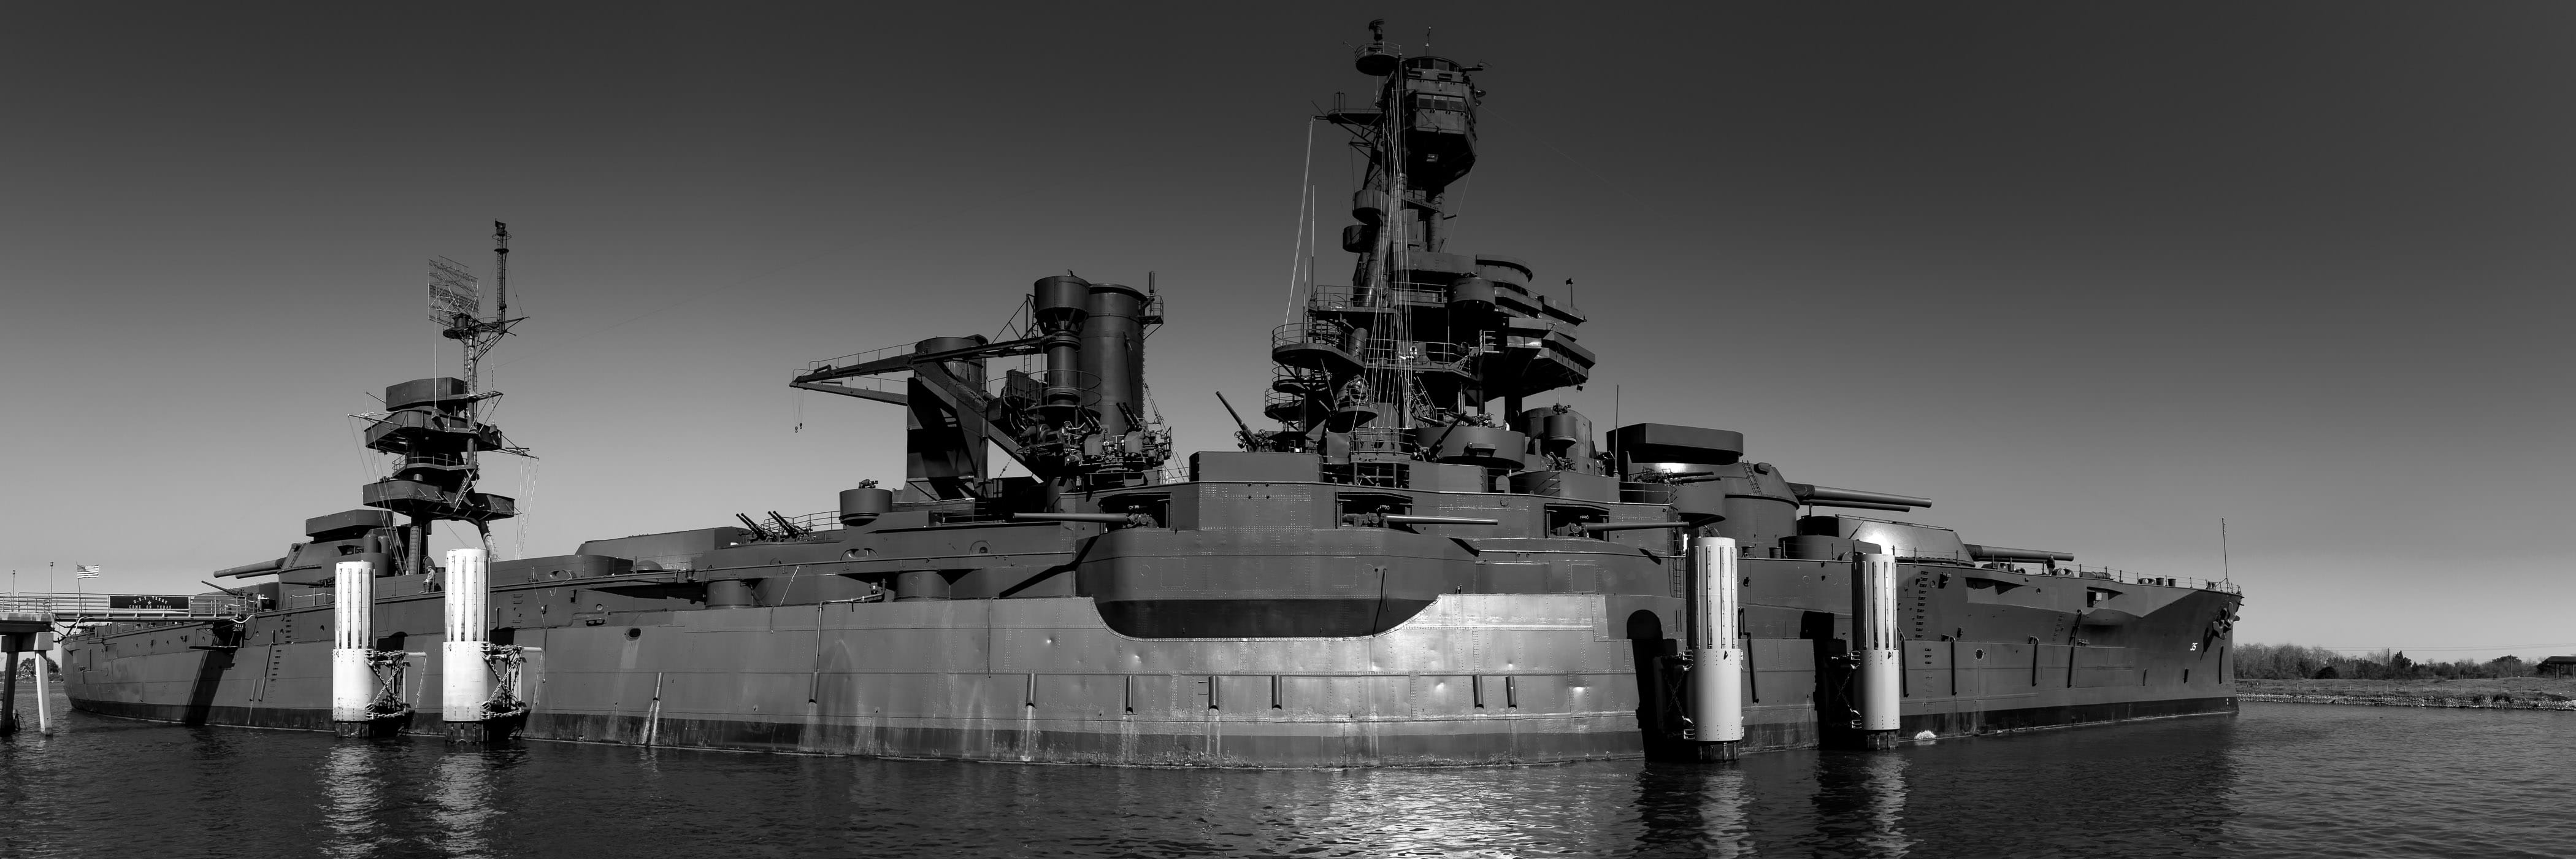 The battleship USS Texas, nicknamed “The Mighty T”, sits in her berth as a museum ship near Houston, prior to be towed to nearby Galveston for major repairs in 2022.